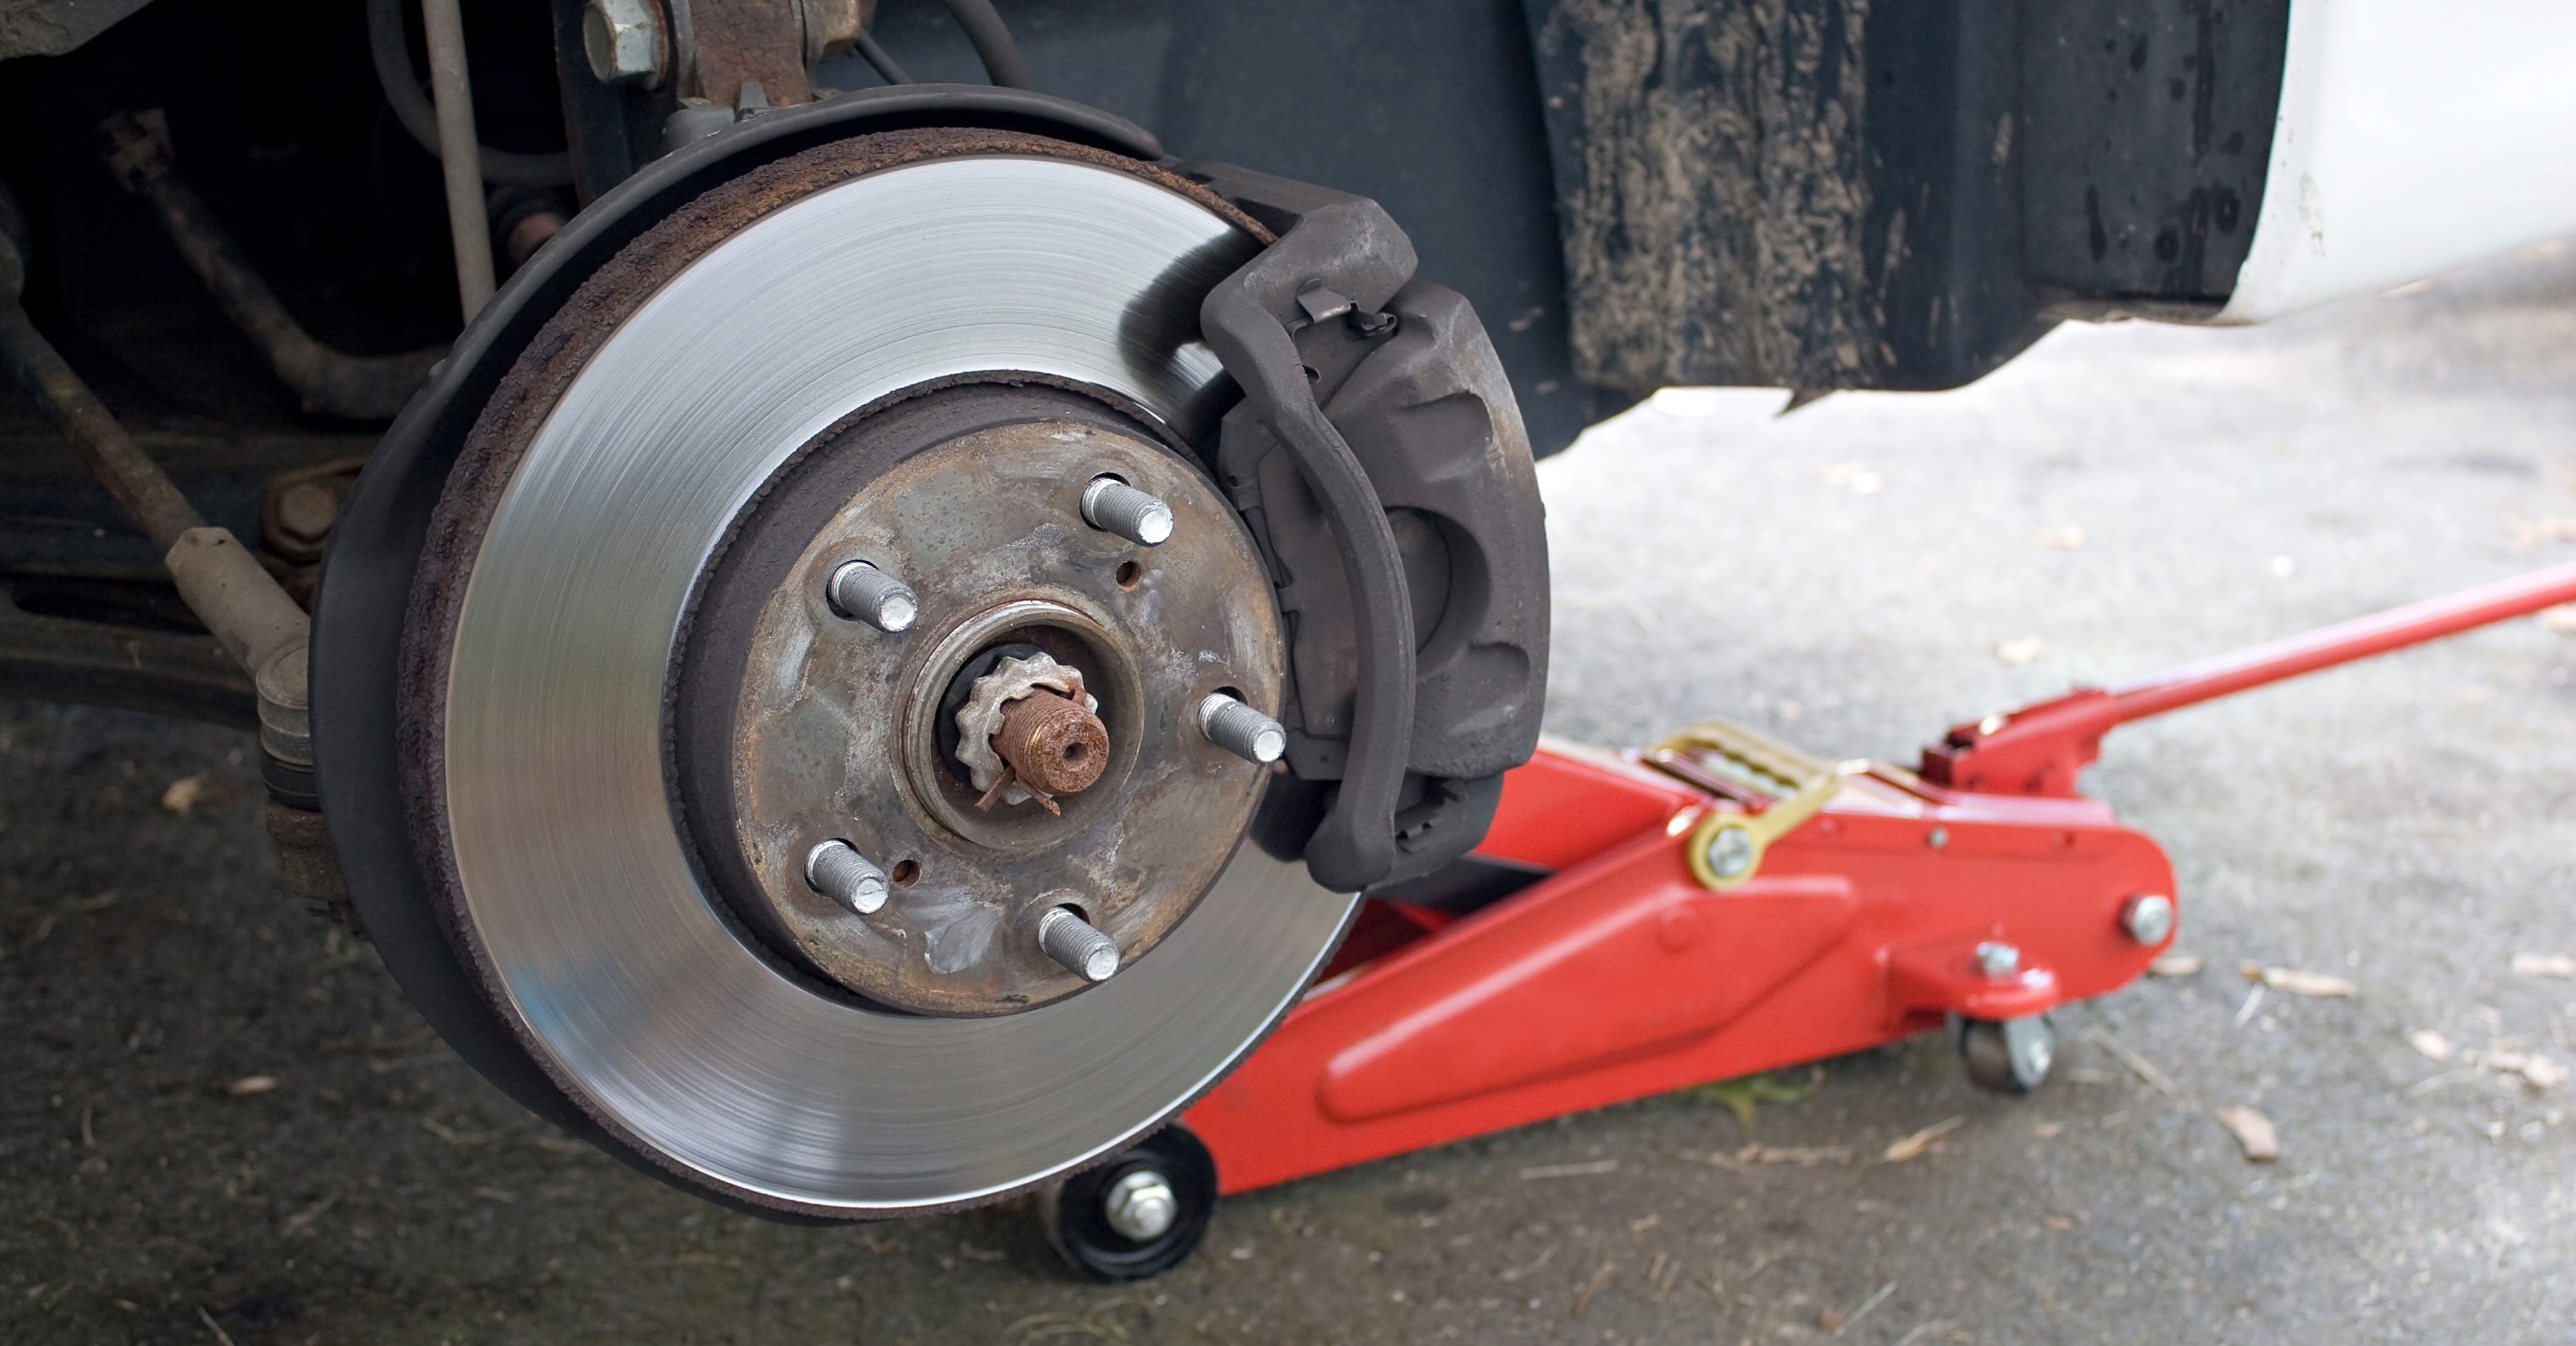 How Do I Know if My Car Needs Brake Repair? Northeast Auto Service